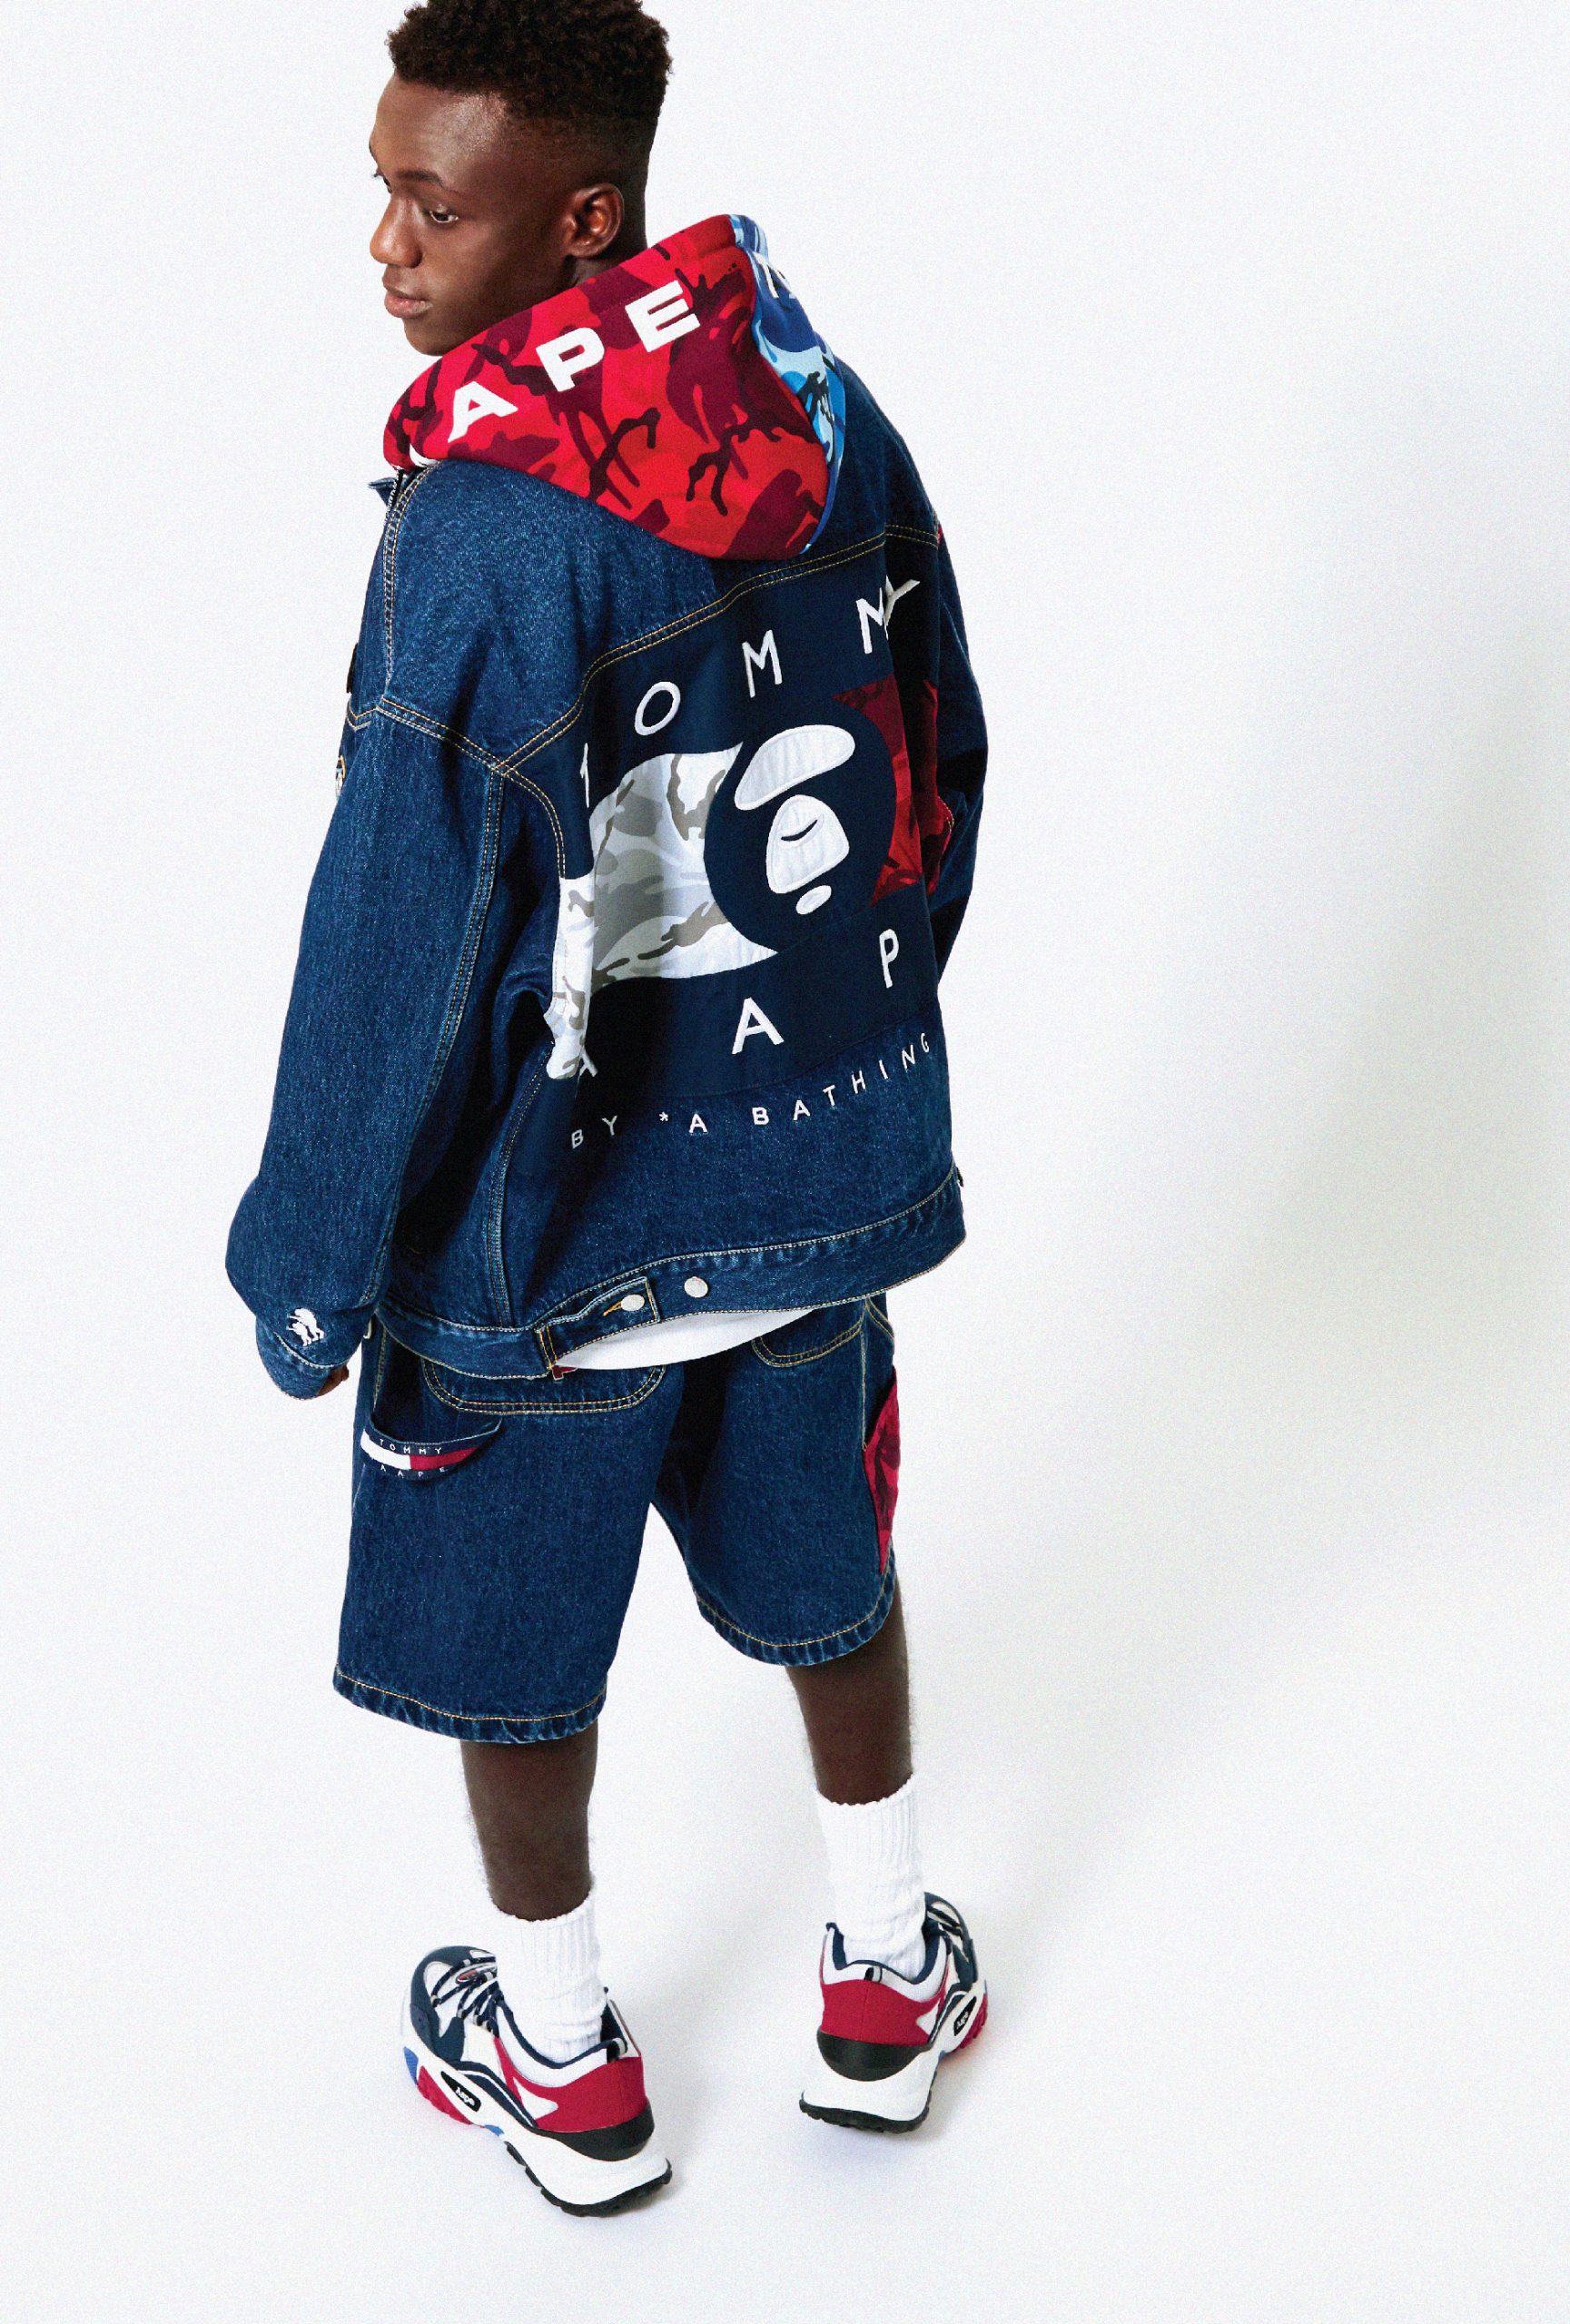 Tommy Jeans and AAPE Offer Up 90's-Inspired Summer Looks